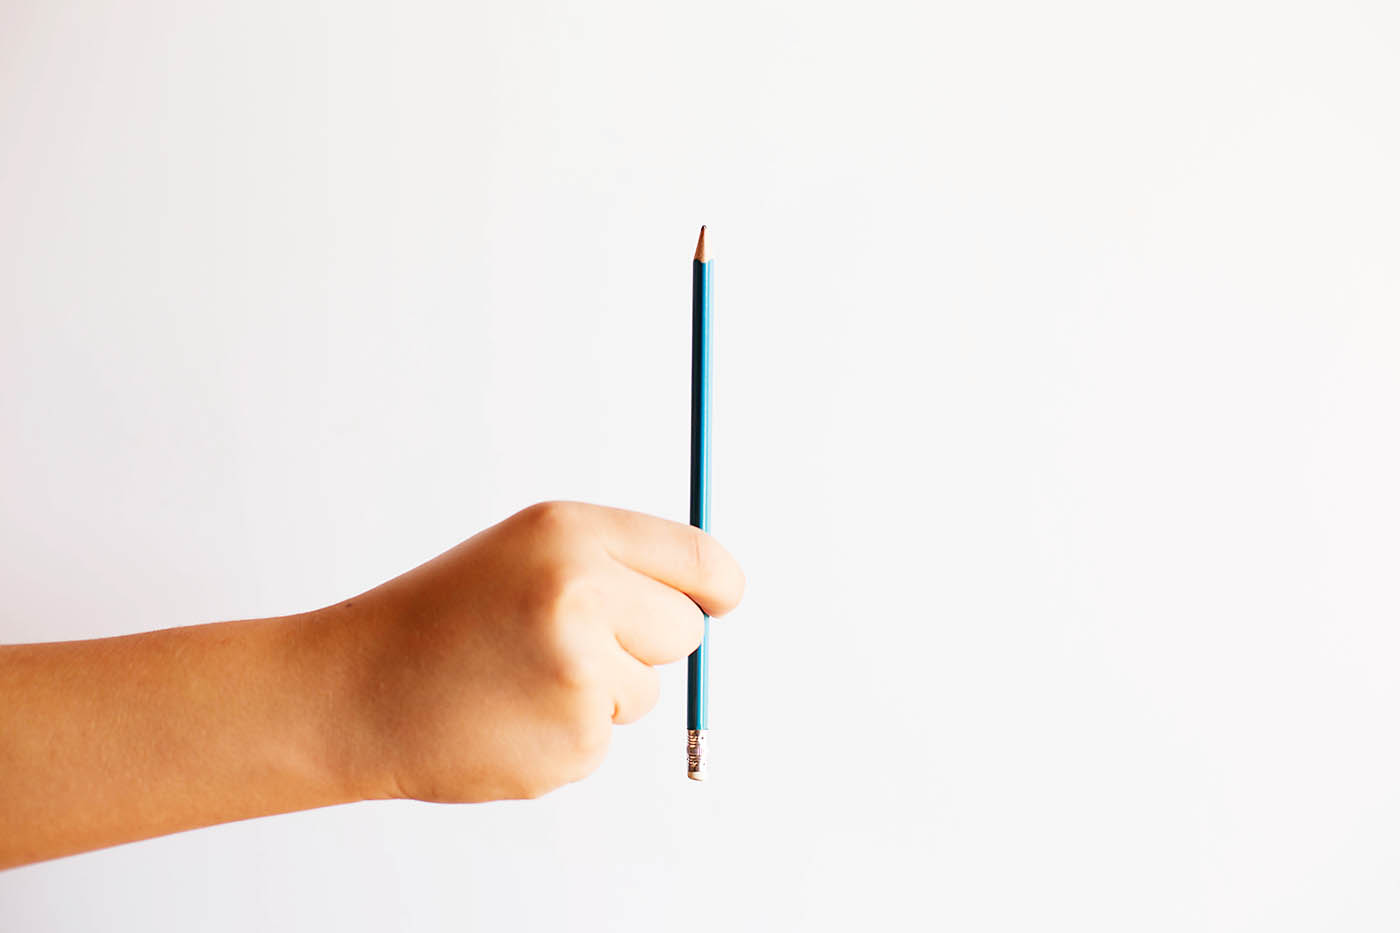 Easy levitating trick for kids - make a pencil, fork, straw or anything small levitate!